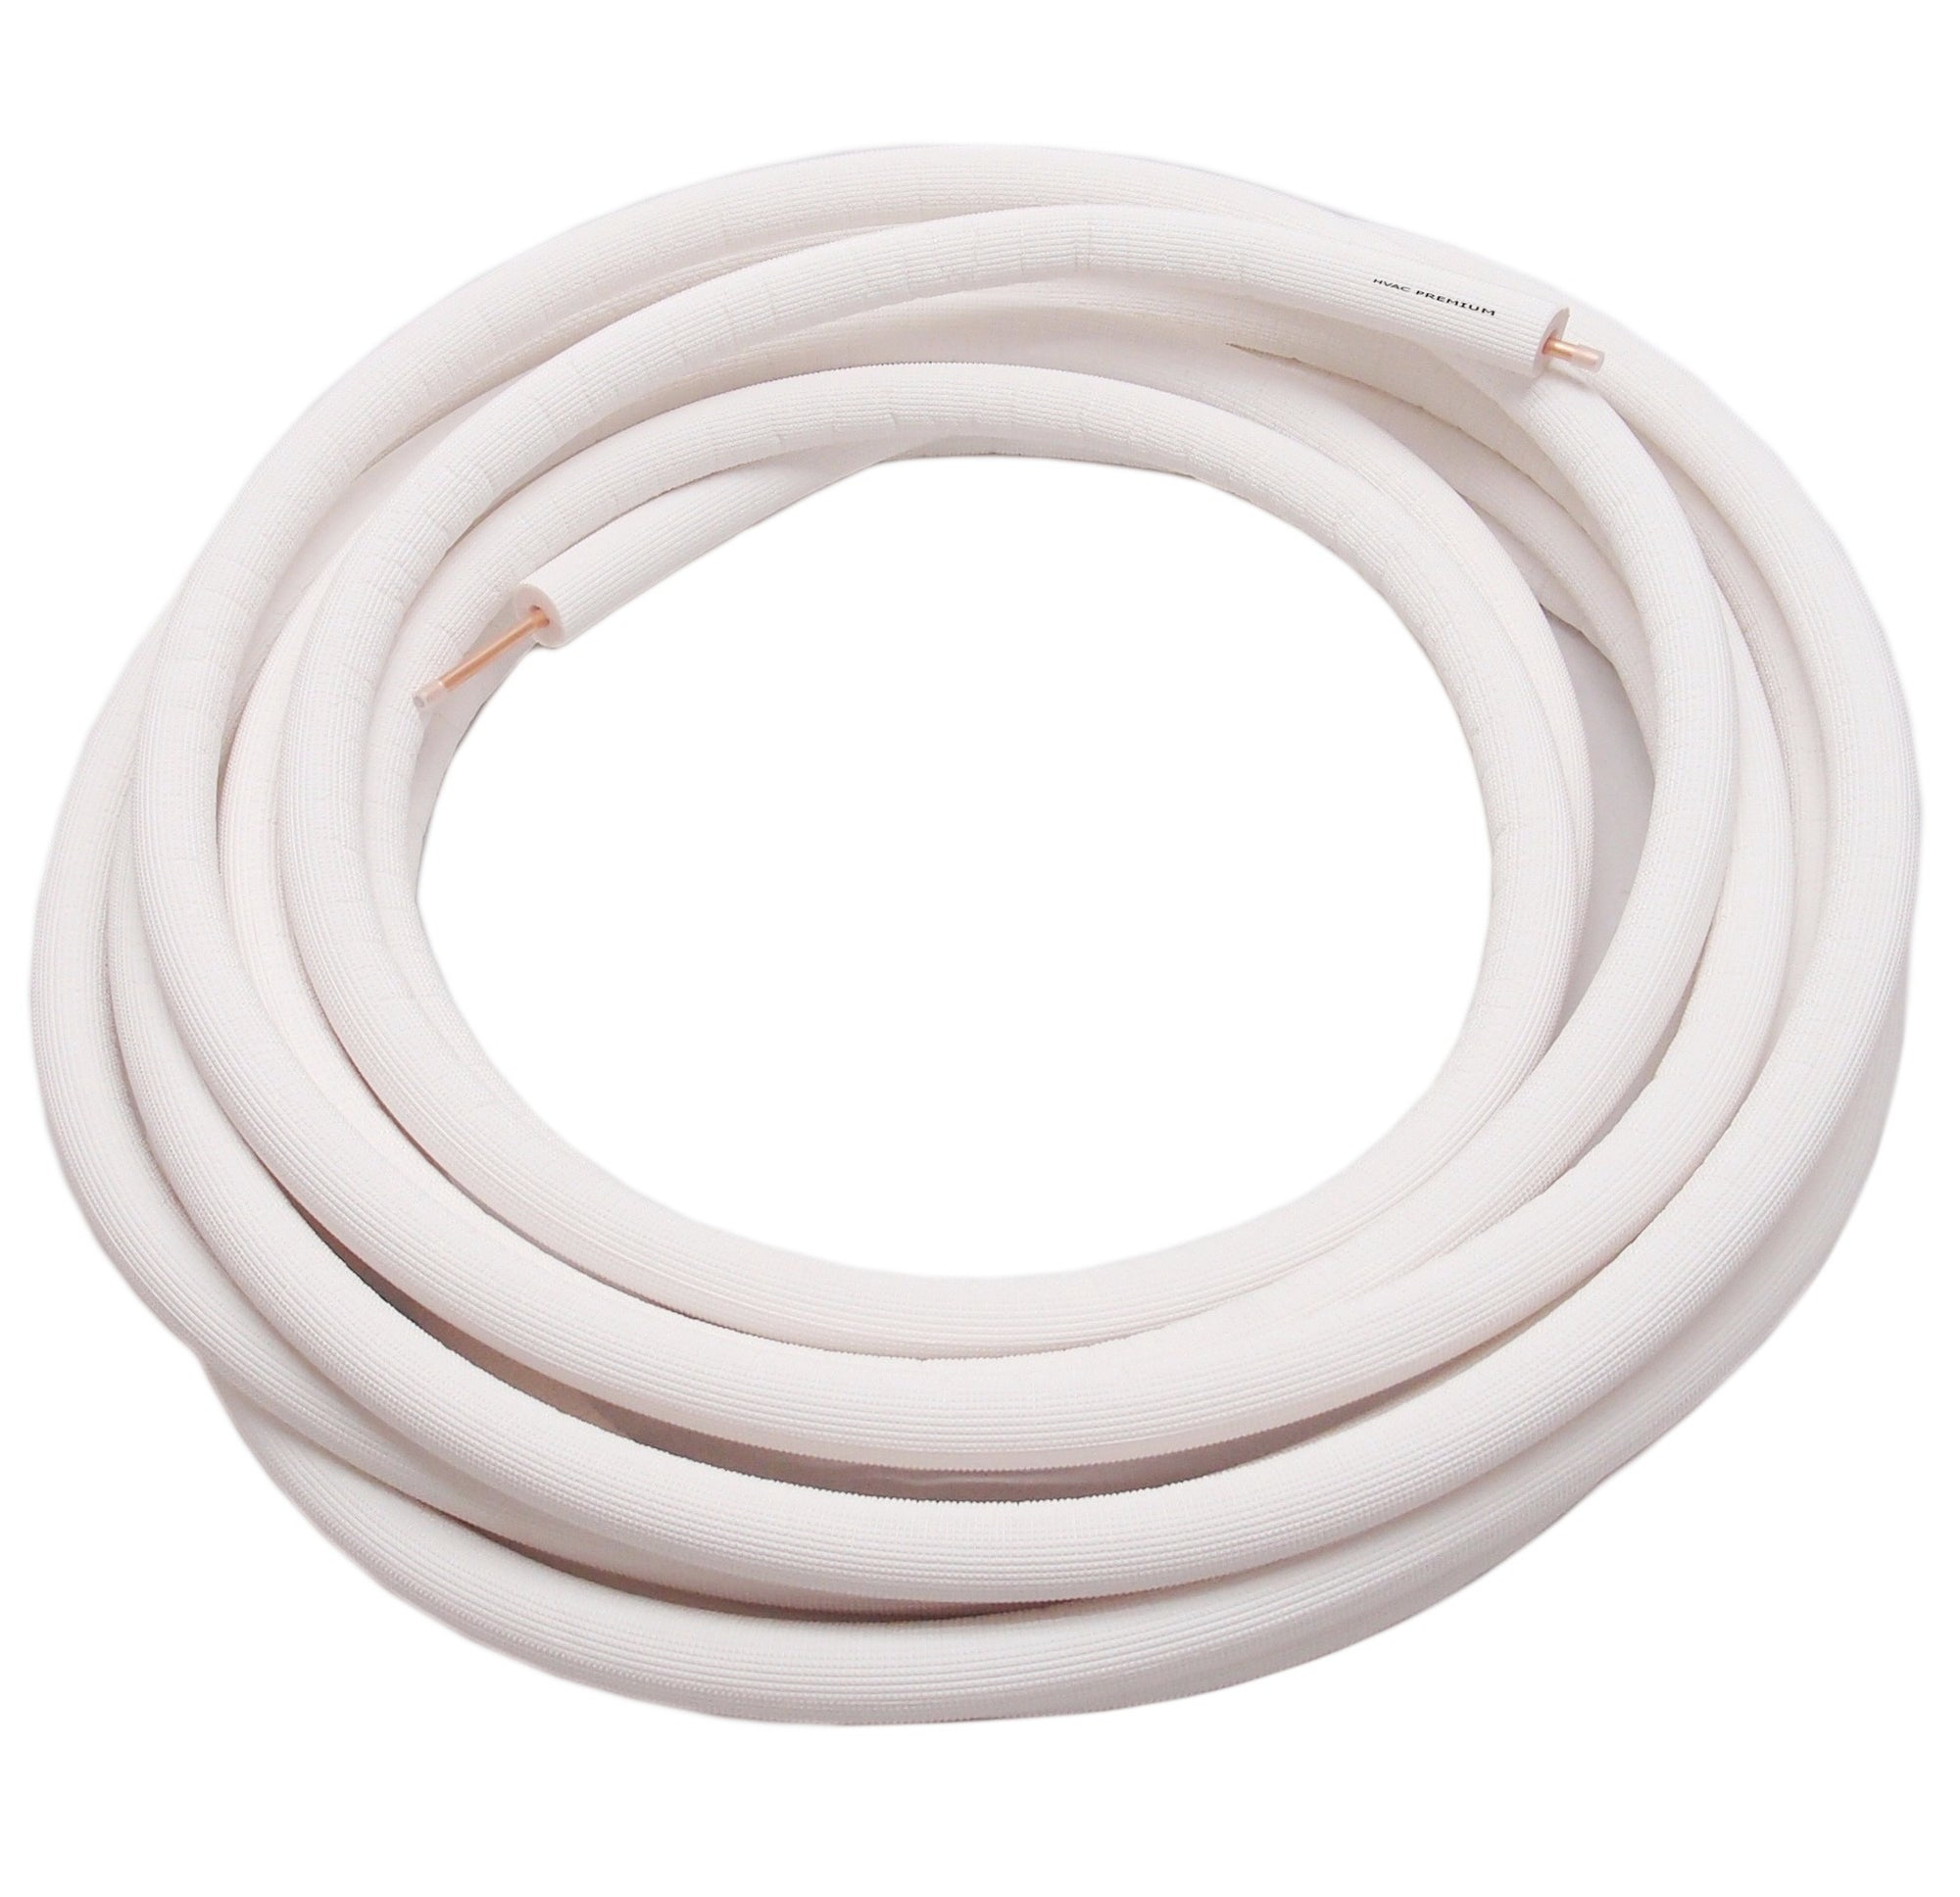 1-1/8" Insulated Copper Coil Line - Seamless Pipe Tube for HVAC, Refrigerant - 1/2" White Insulation - 35' Long